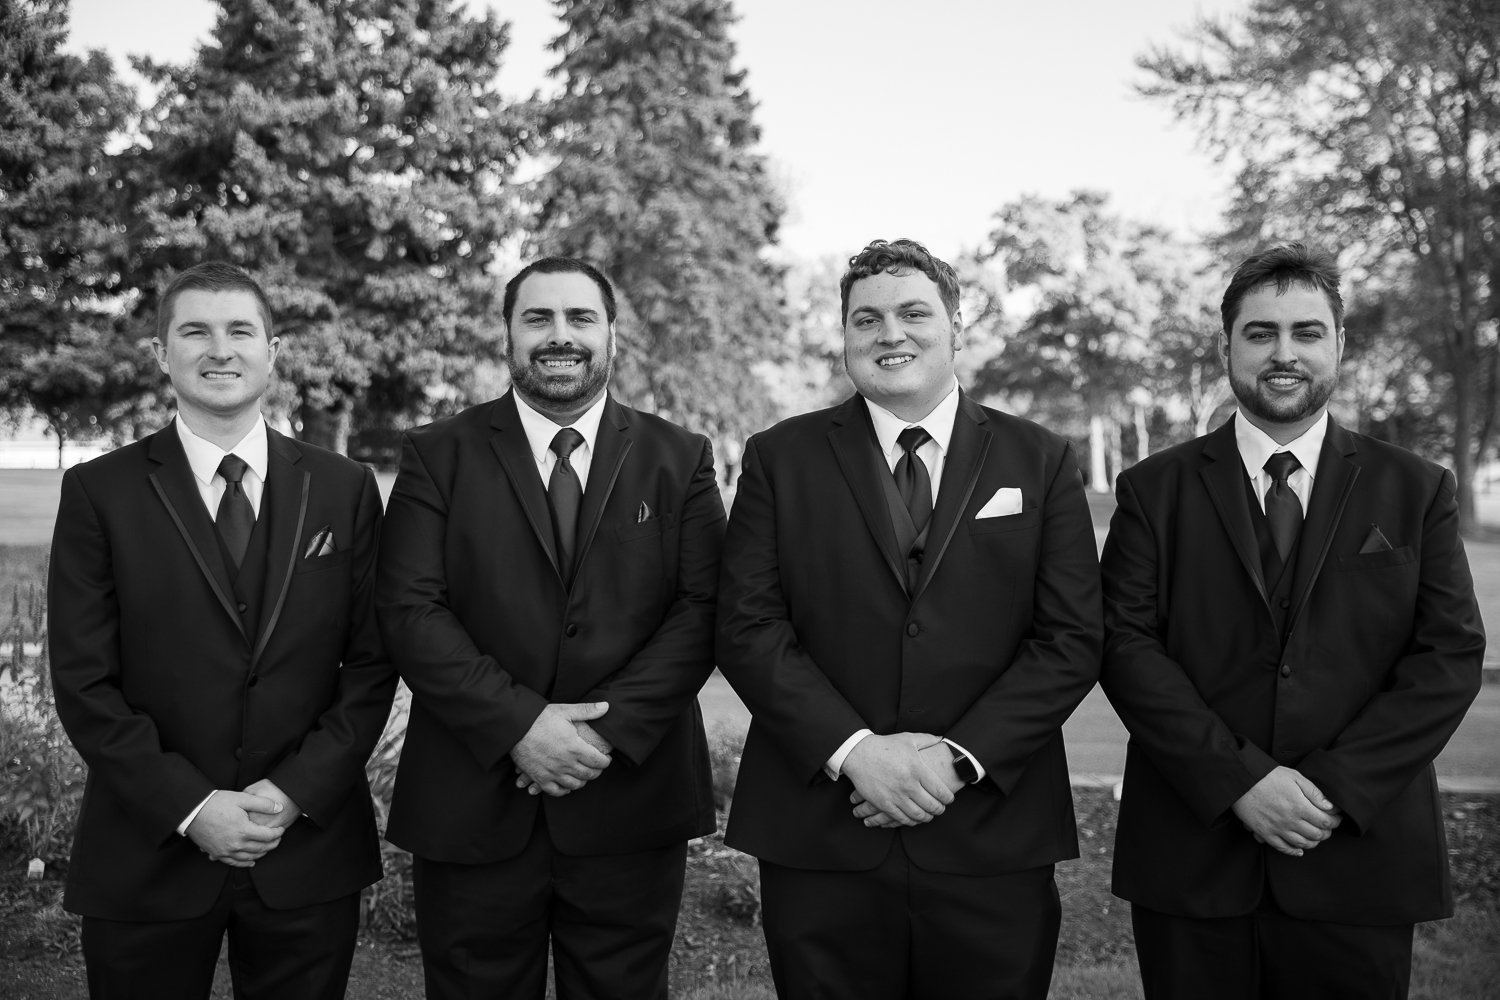 Groomsmen photos at meadowbrook Country Club